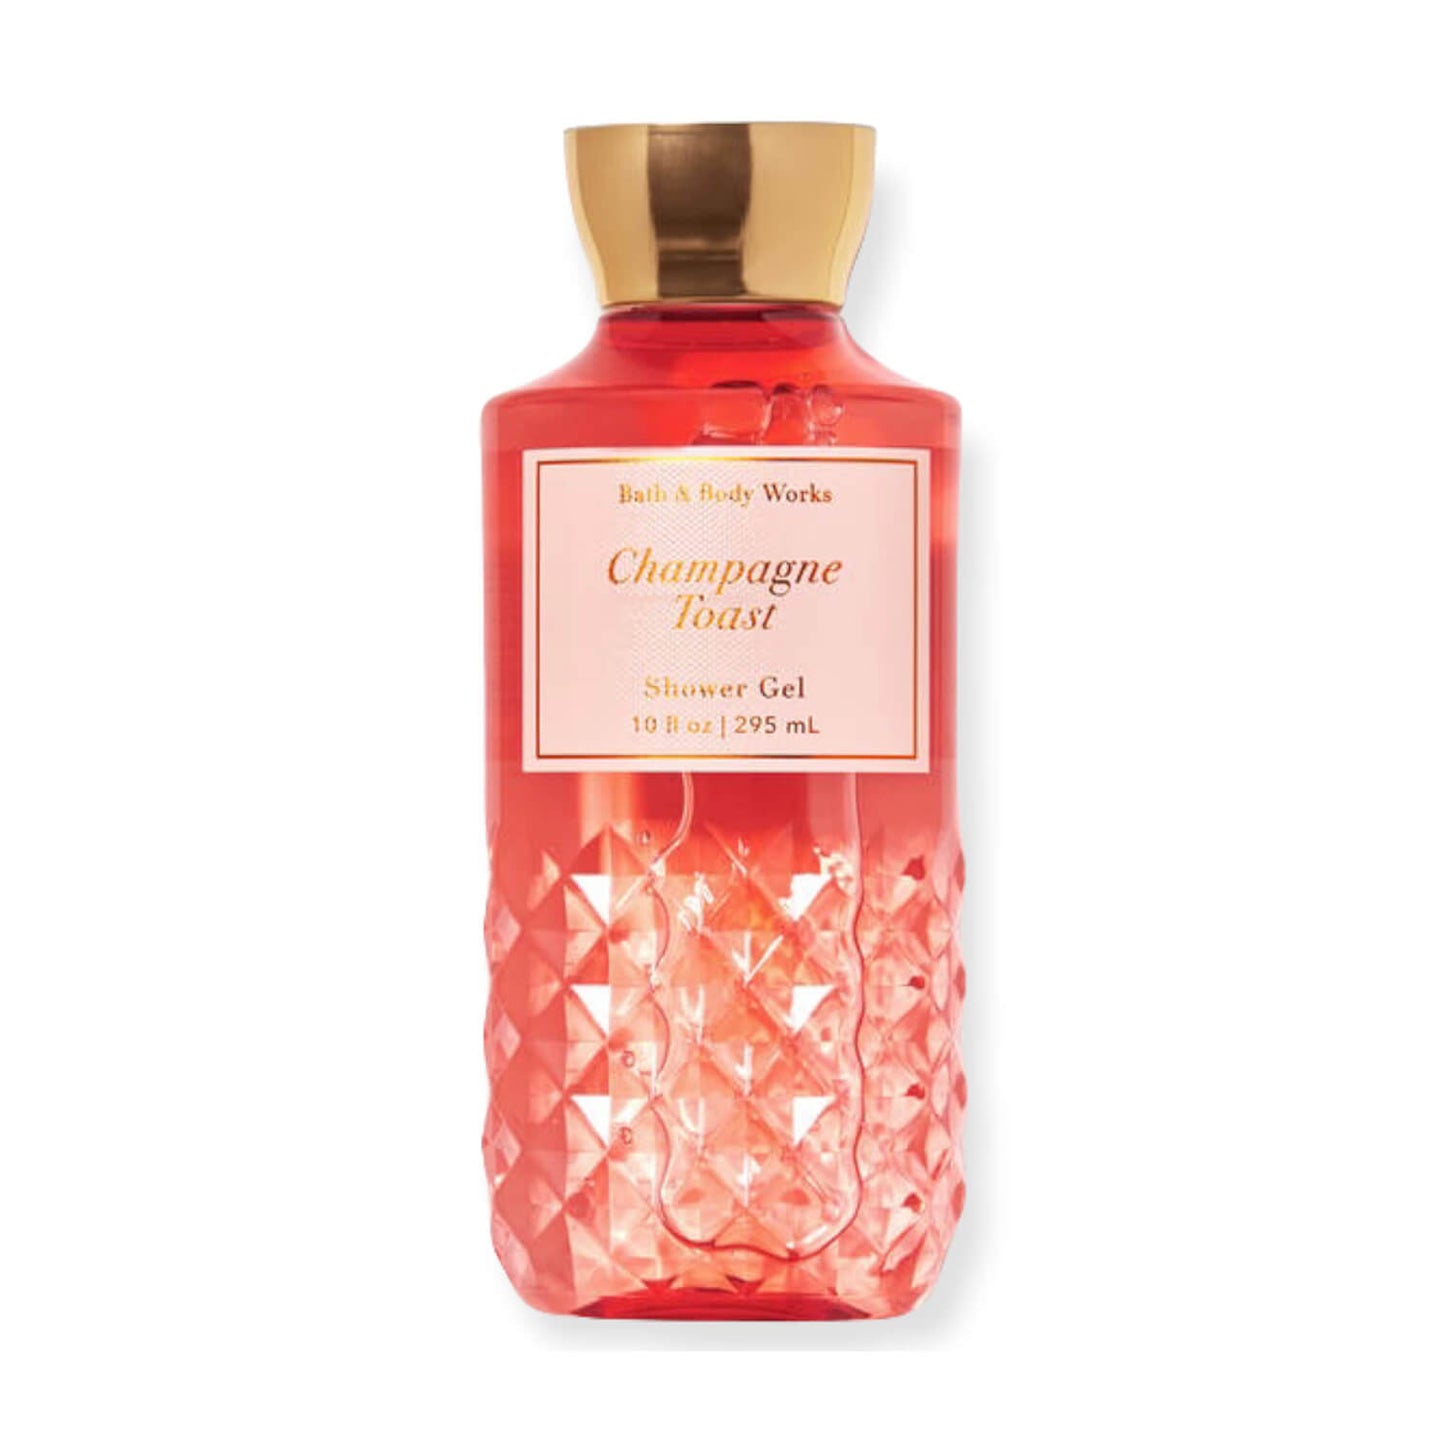 buy bath and body works shower gel in champagne toast fragrance available for delivery in Pakistan